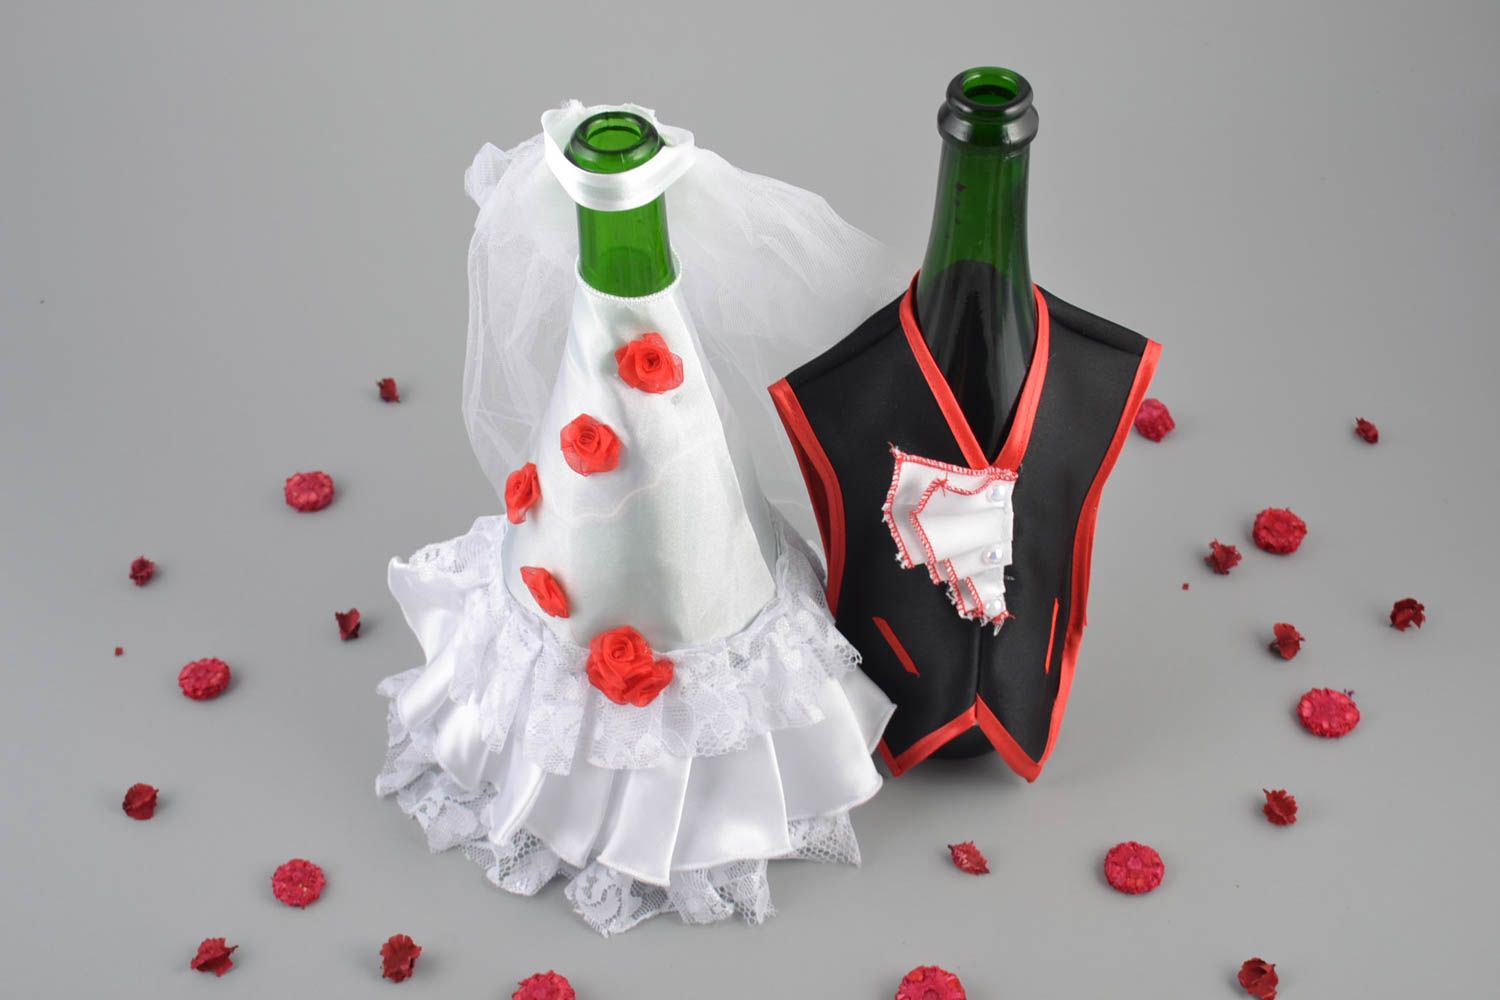 Handmade clothes bride and groom for champagne bottles made of satin and veiling photo 1